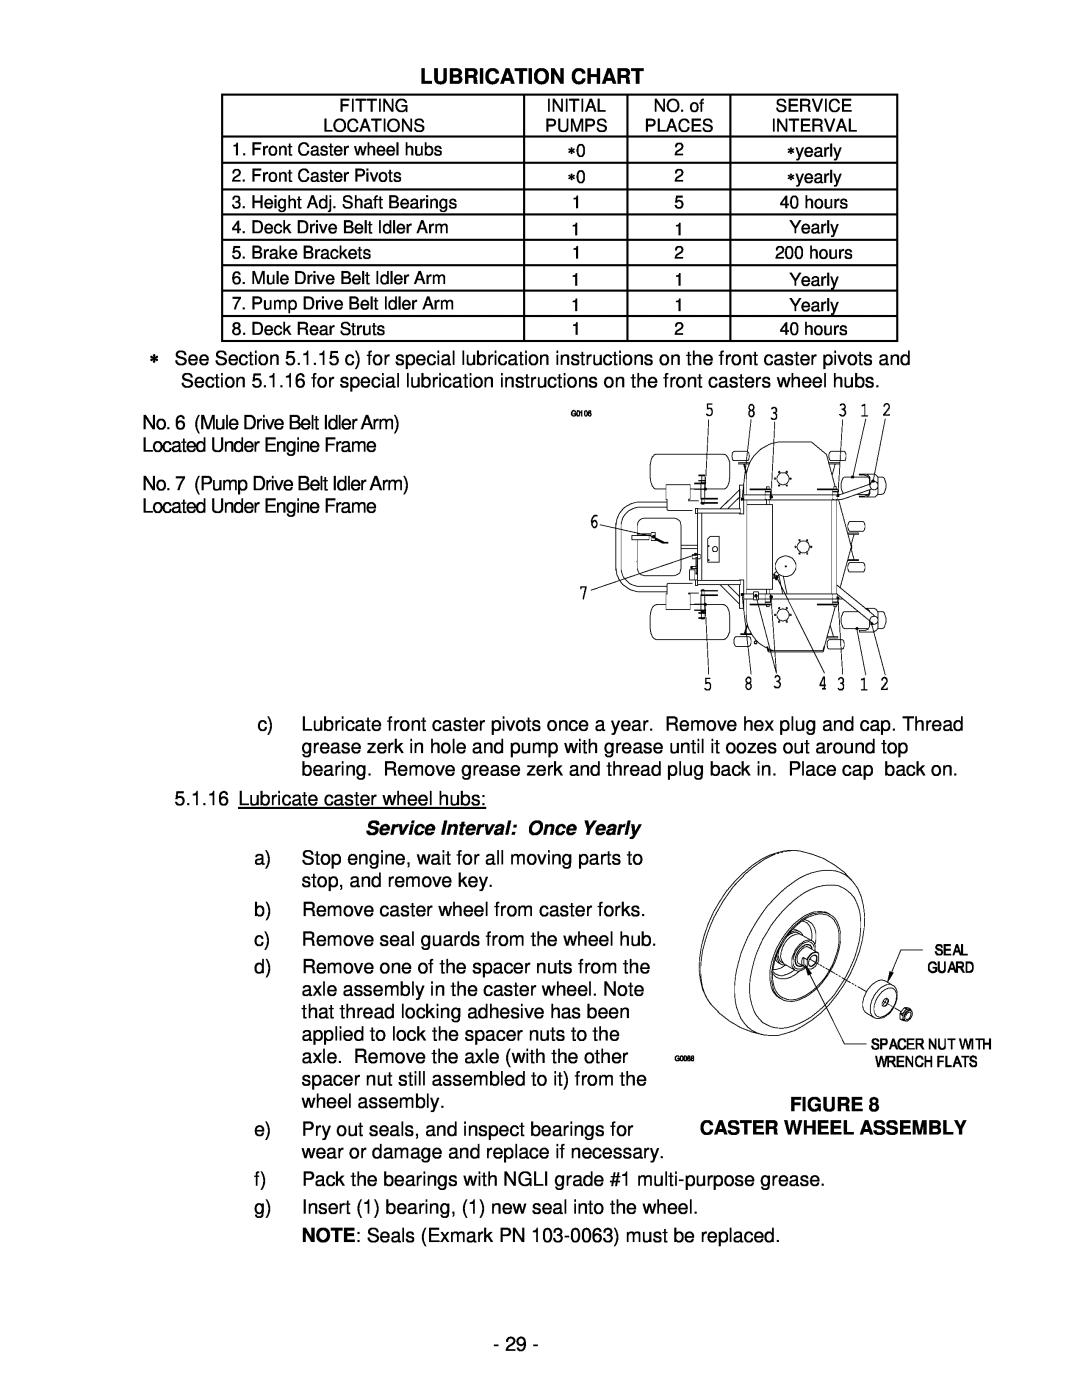 Exmark Lawn Tractor manual Lubrication Chart, Service Interval Once Yearly, Caster Wheel Assembly 